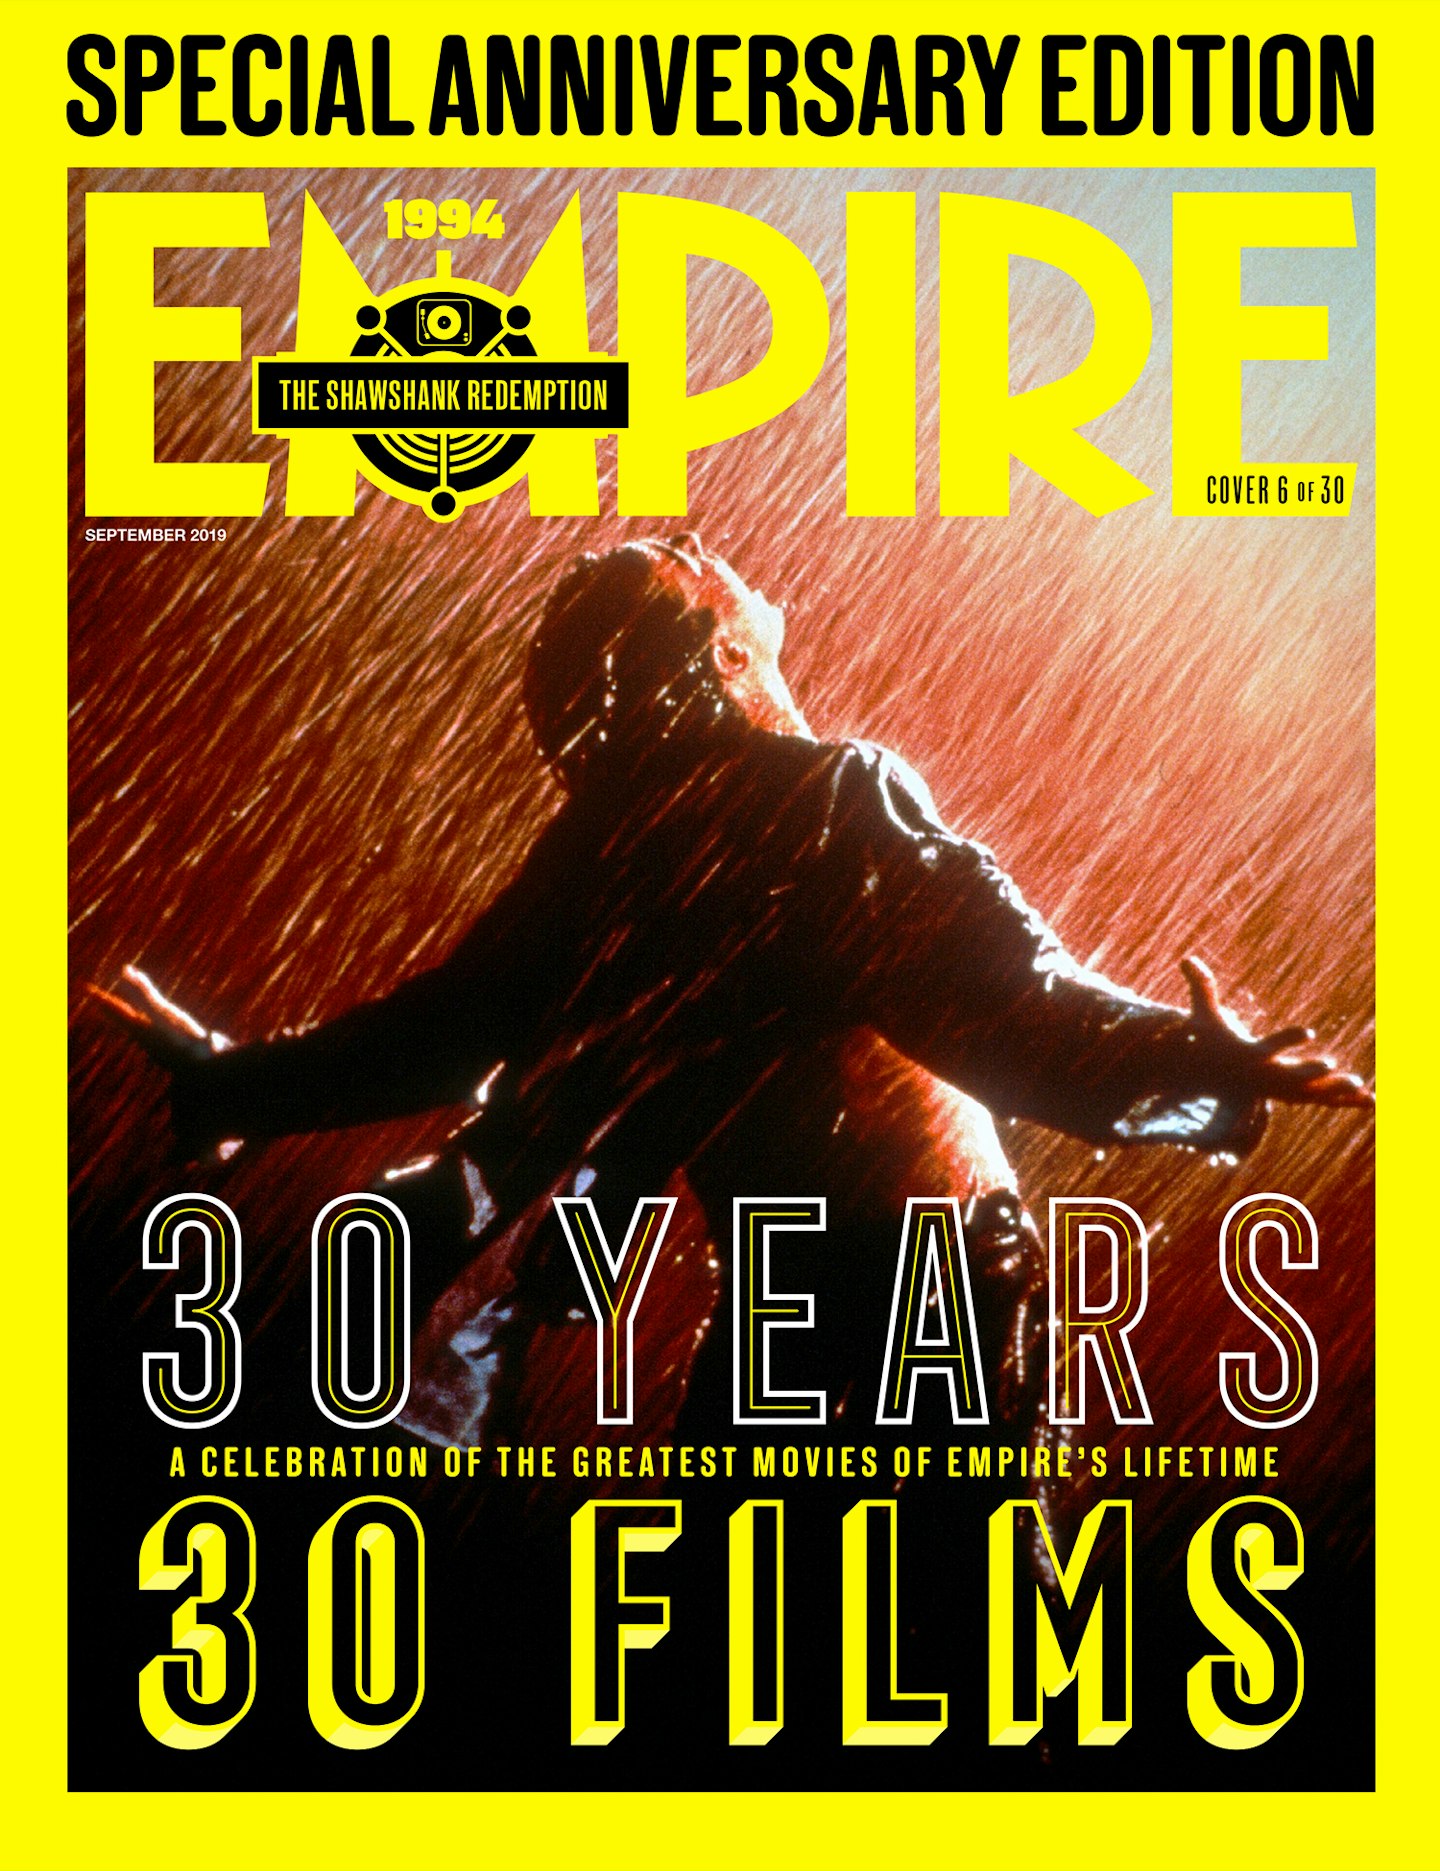 Empire's 30th Anniversary Edition Covers – The Shawshank Redemption